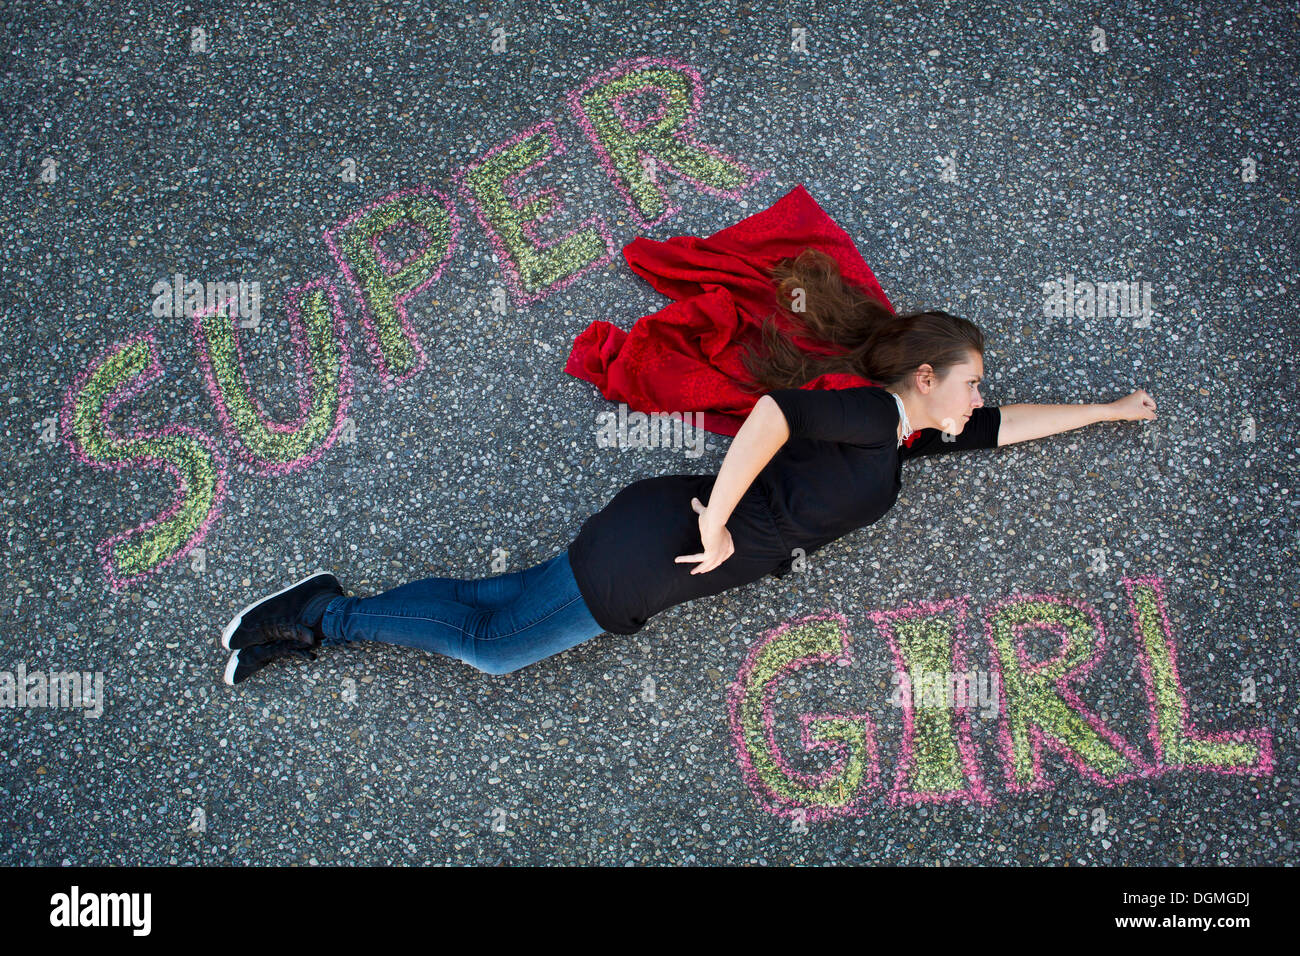 Young woman appearing to fly in a Superman or Supergirl position, text 'Super Girl', taken from above Stock Photo